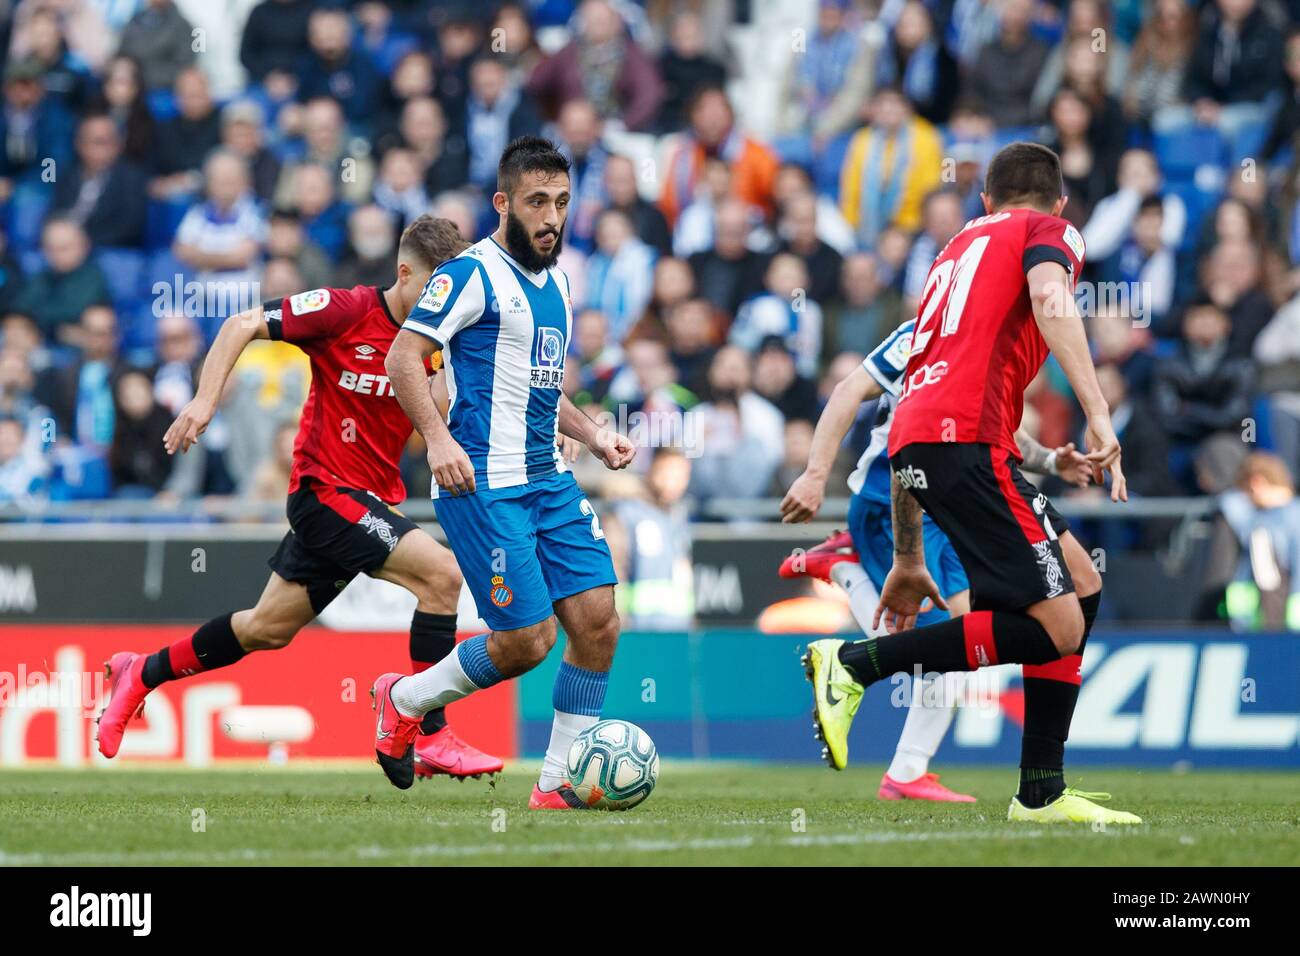 Barcelona, Spain. 09th Feb, 2020. Matias Vargas of RCD Espanyol in action during the Liga match between RCD Espanyol and FC Barcelona at RCD Stadium on February 09, 2020 in Barcelona, Spain. Credit: DAX/ESPA/Alamy Live News Stock Photo